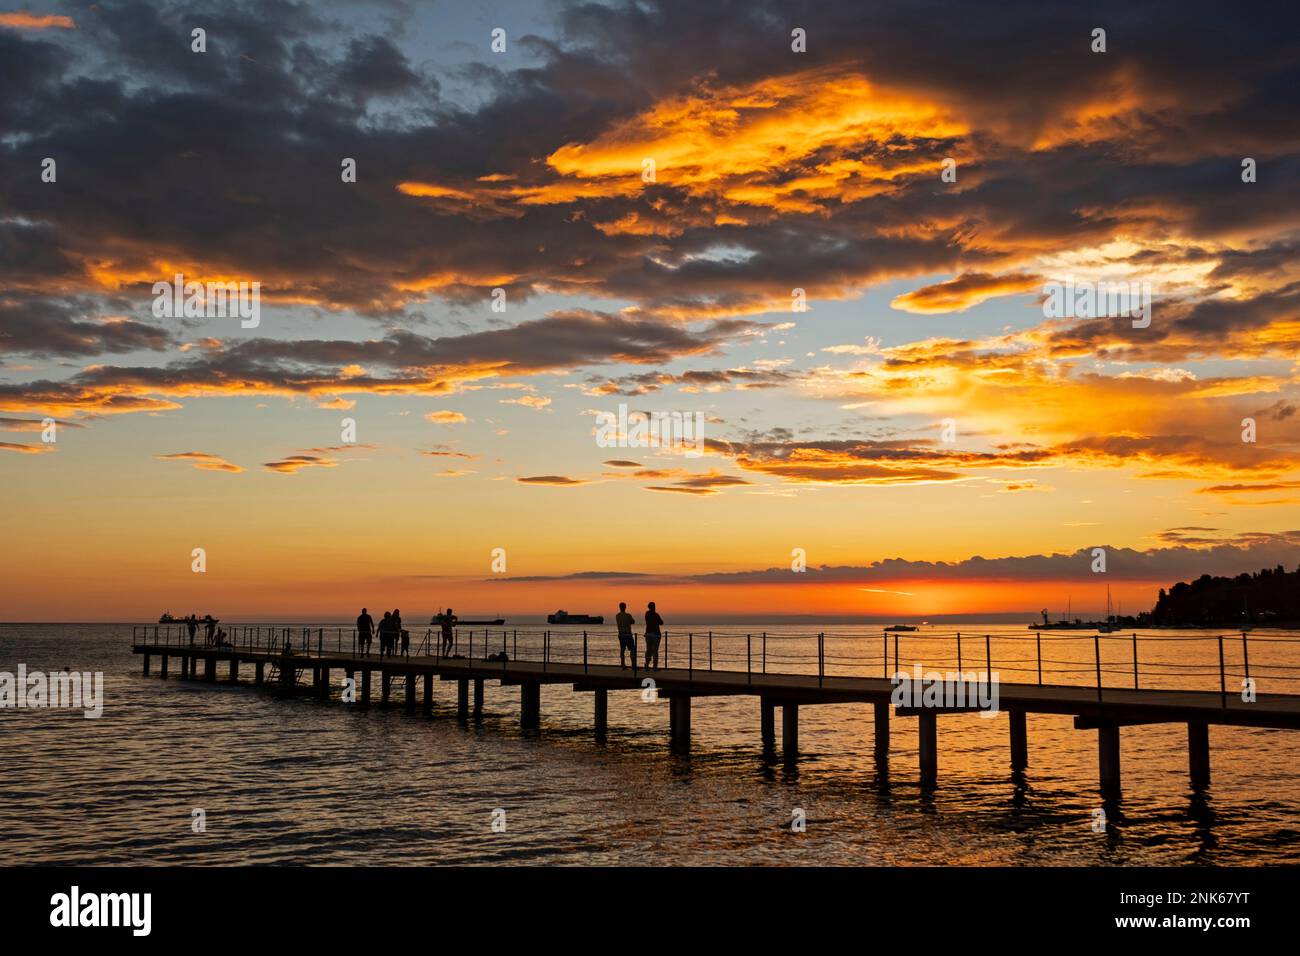 Jetty with tourists silhouetted against sunset over the Adriatic Sea at Ankaran along the Slovenian Riviera, Littoral region of Slovenia Stock Photo